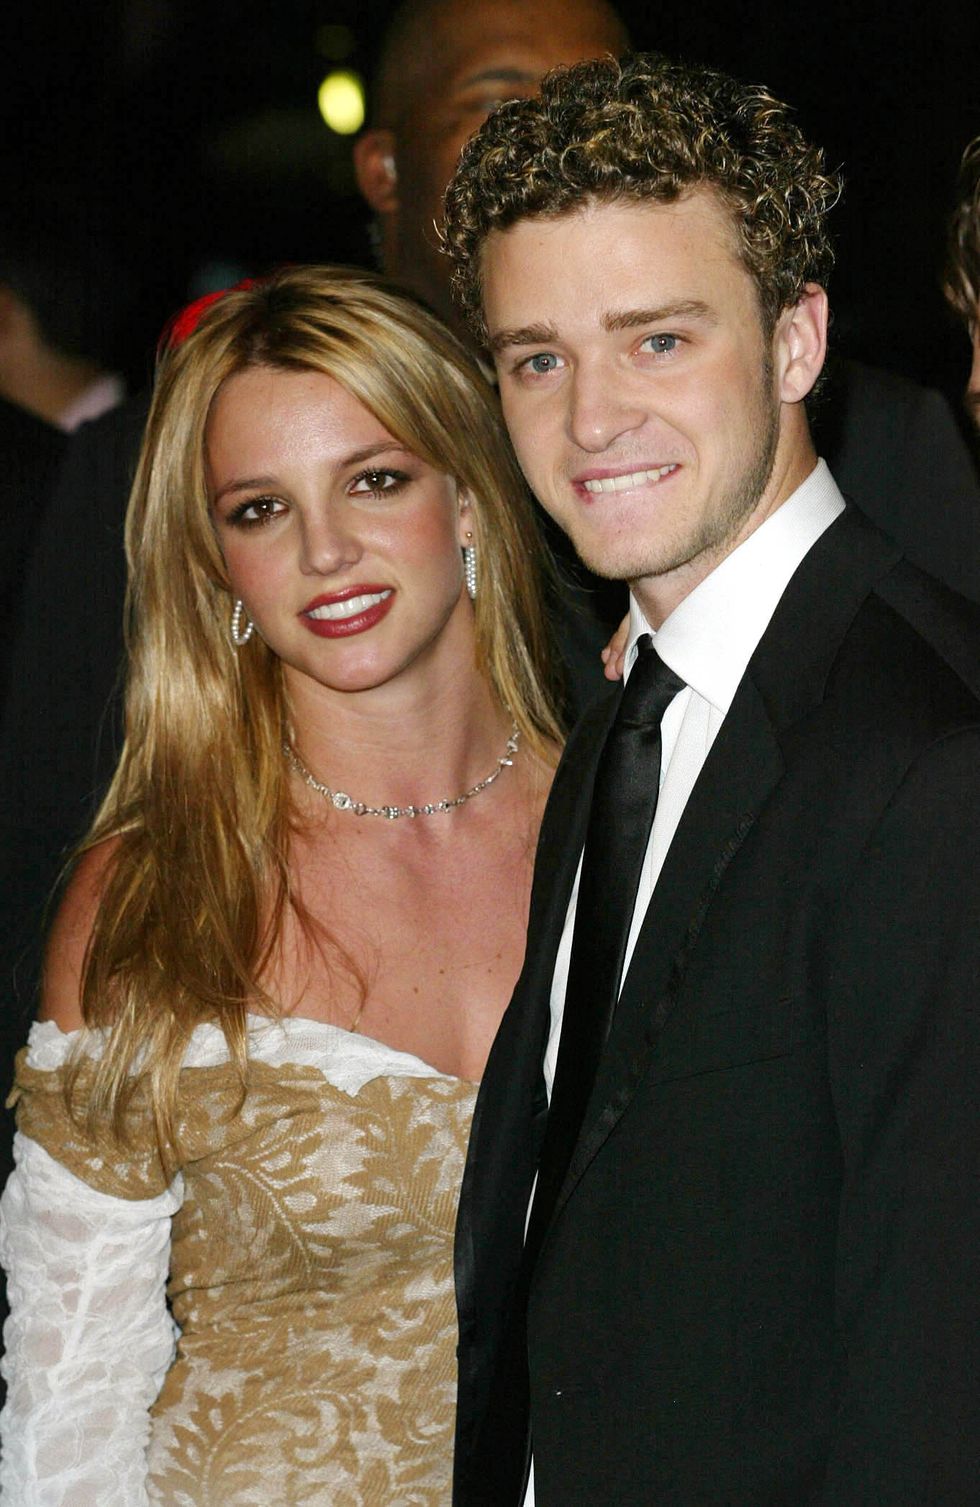 justin-timberlake-reportedly-wants-everyone-to-‘evolve’-instead-of-focusing-on-his-past-with-britney-spears